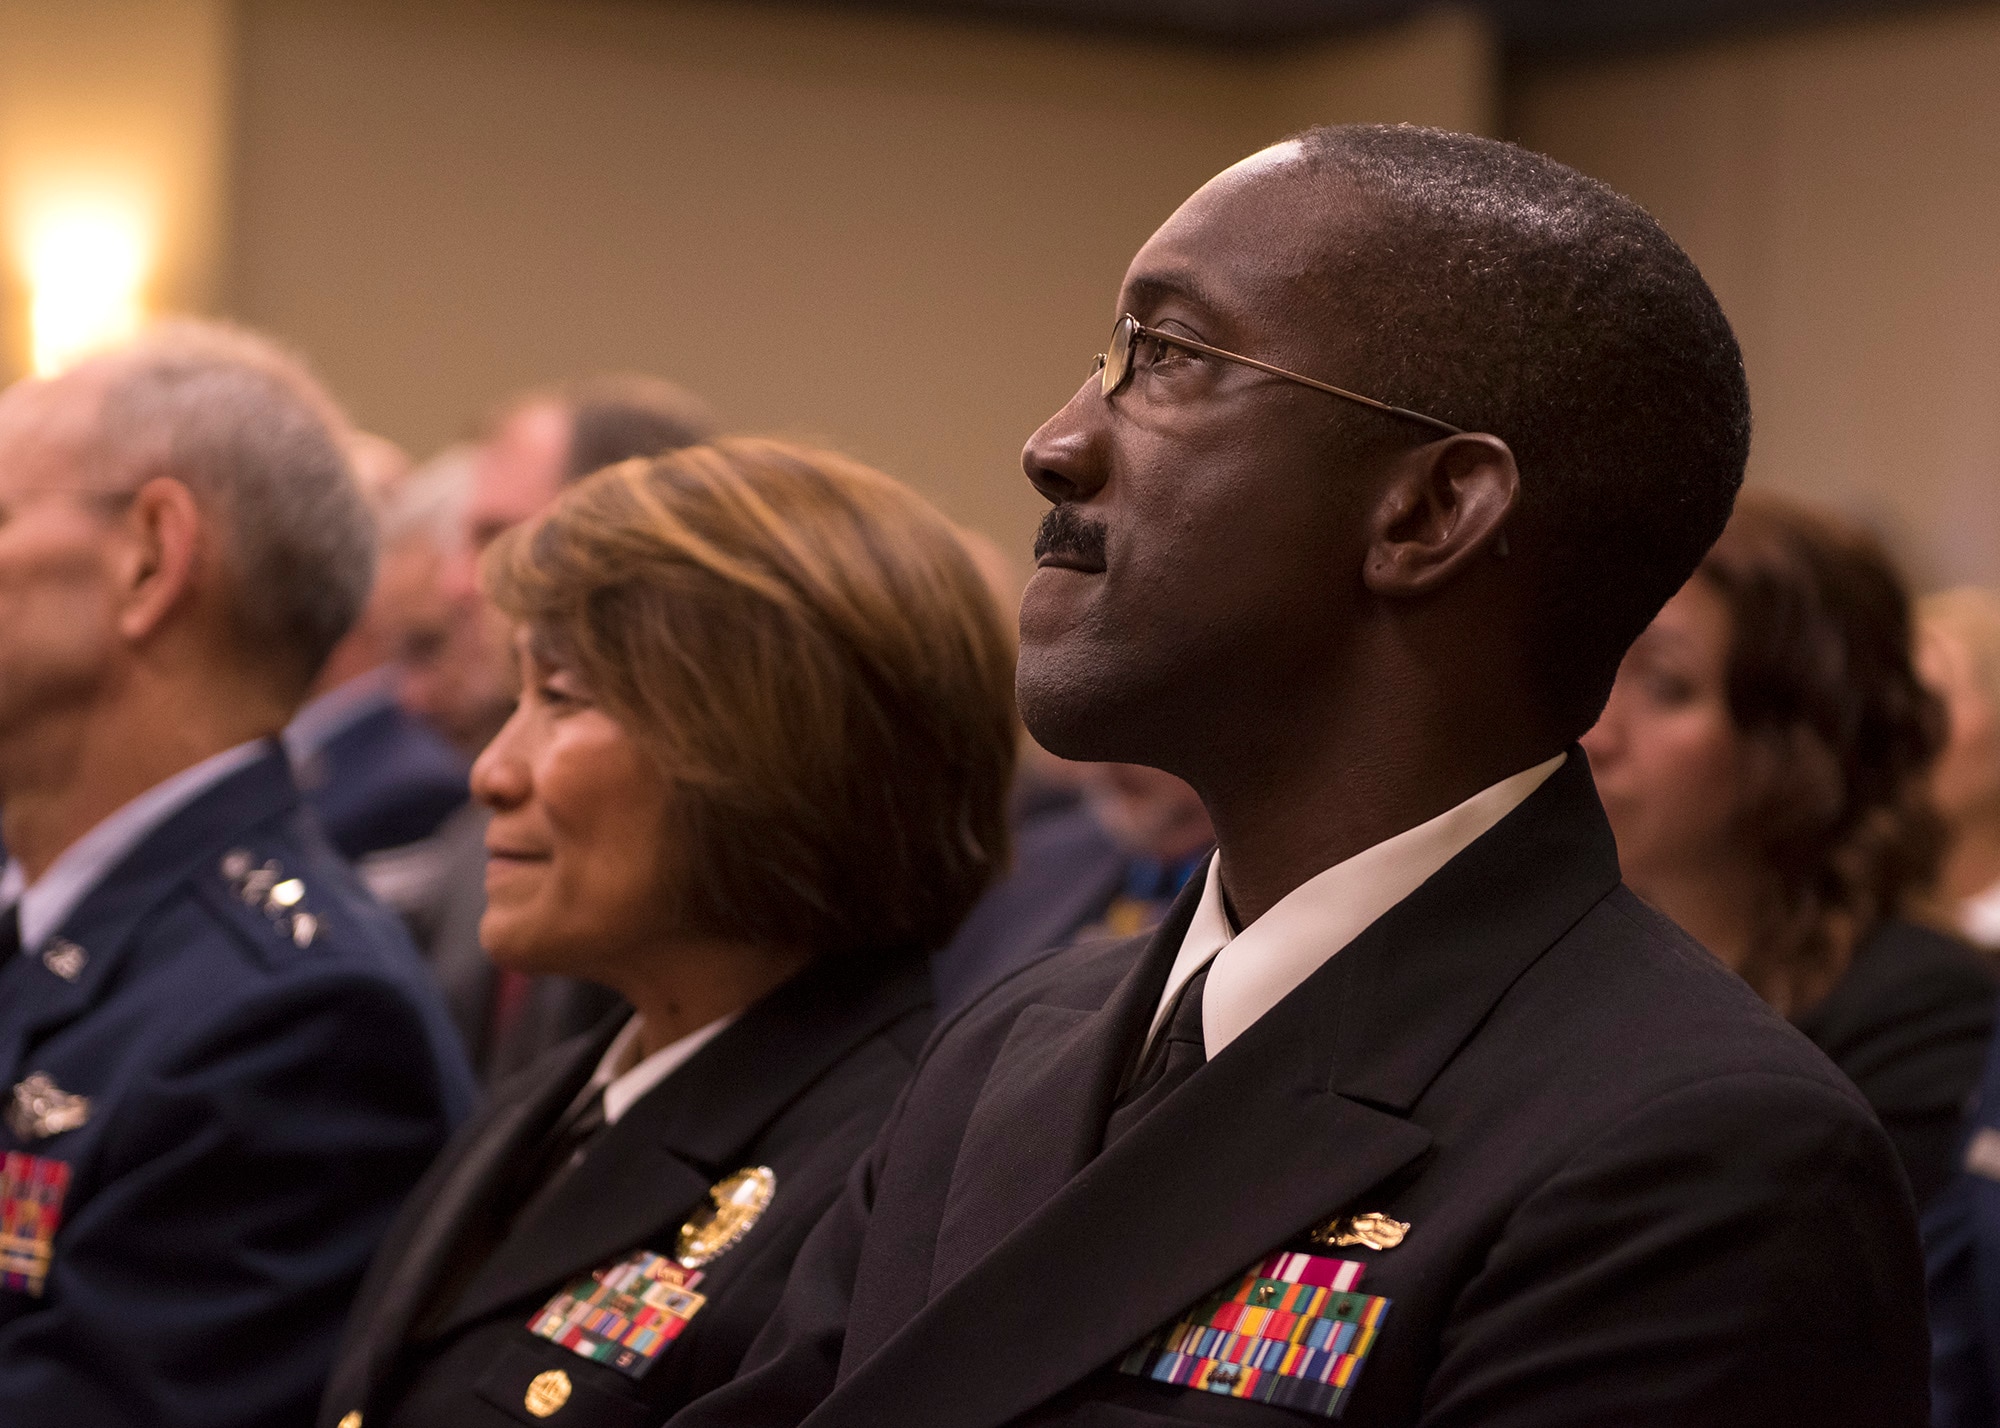 Navy Capt. James Ellzy, Defense Health Management Systems executive officer, watches a guest speaker during a "go-live" recognition ceremony for MHS Genesis Feb. 15, 2017, at Fairchild Air Force Base, Wash. Ellzy was the master of ceremonies during the event. (U.S. Air Force photo/Airman 1st Class Ryan Lackey)